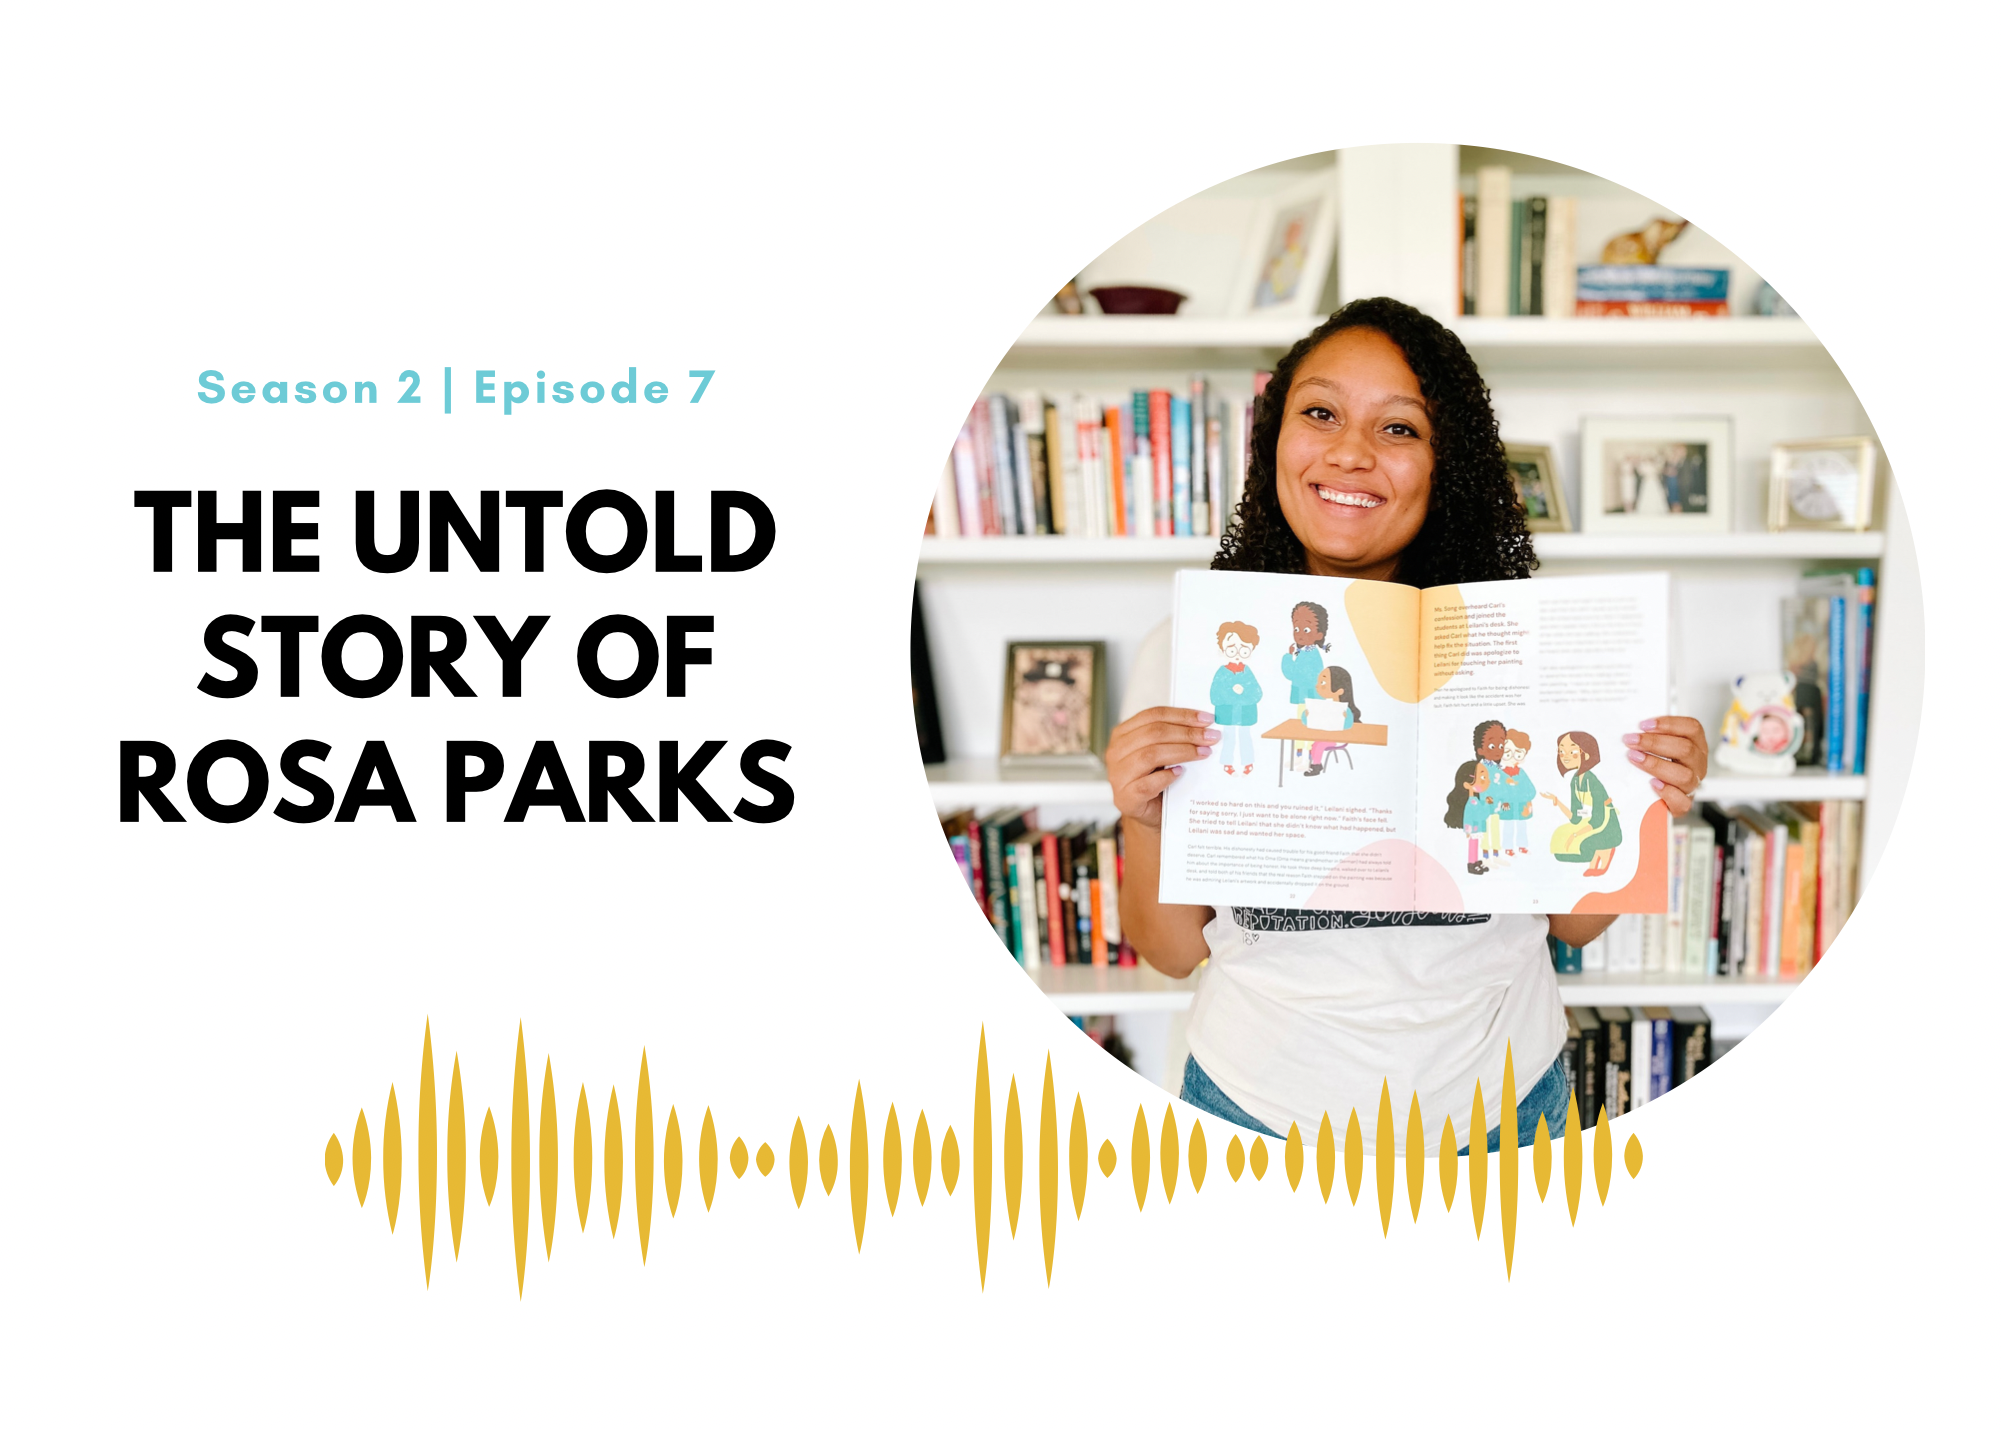 The Untold Story of Rosa Parks